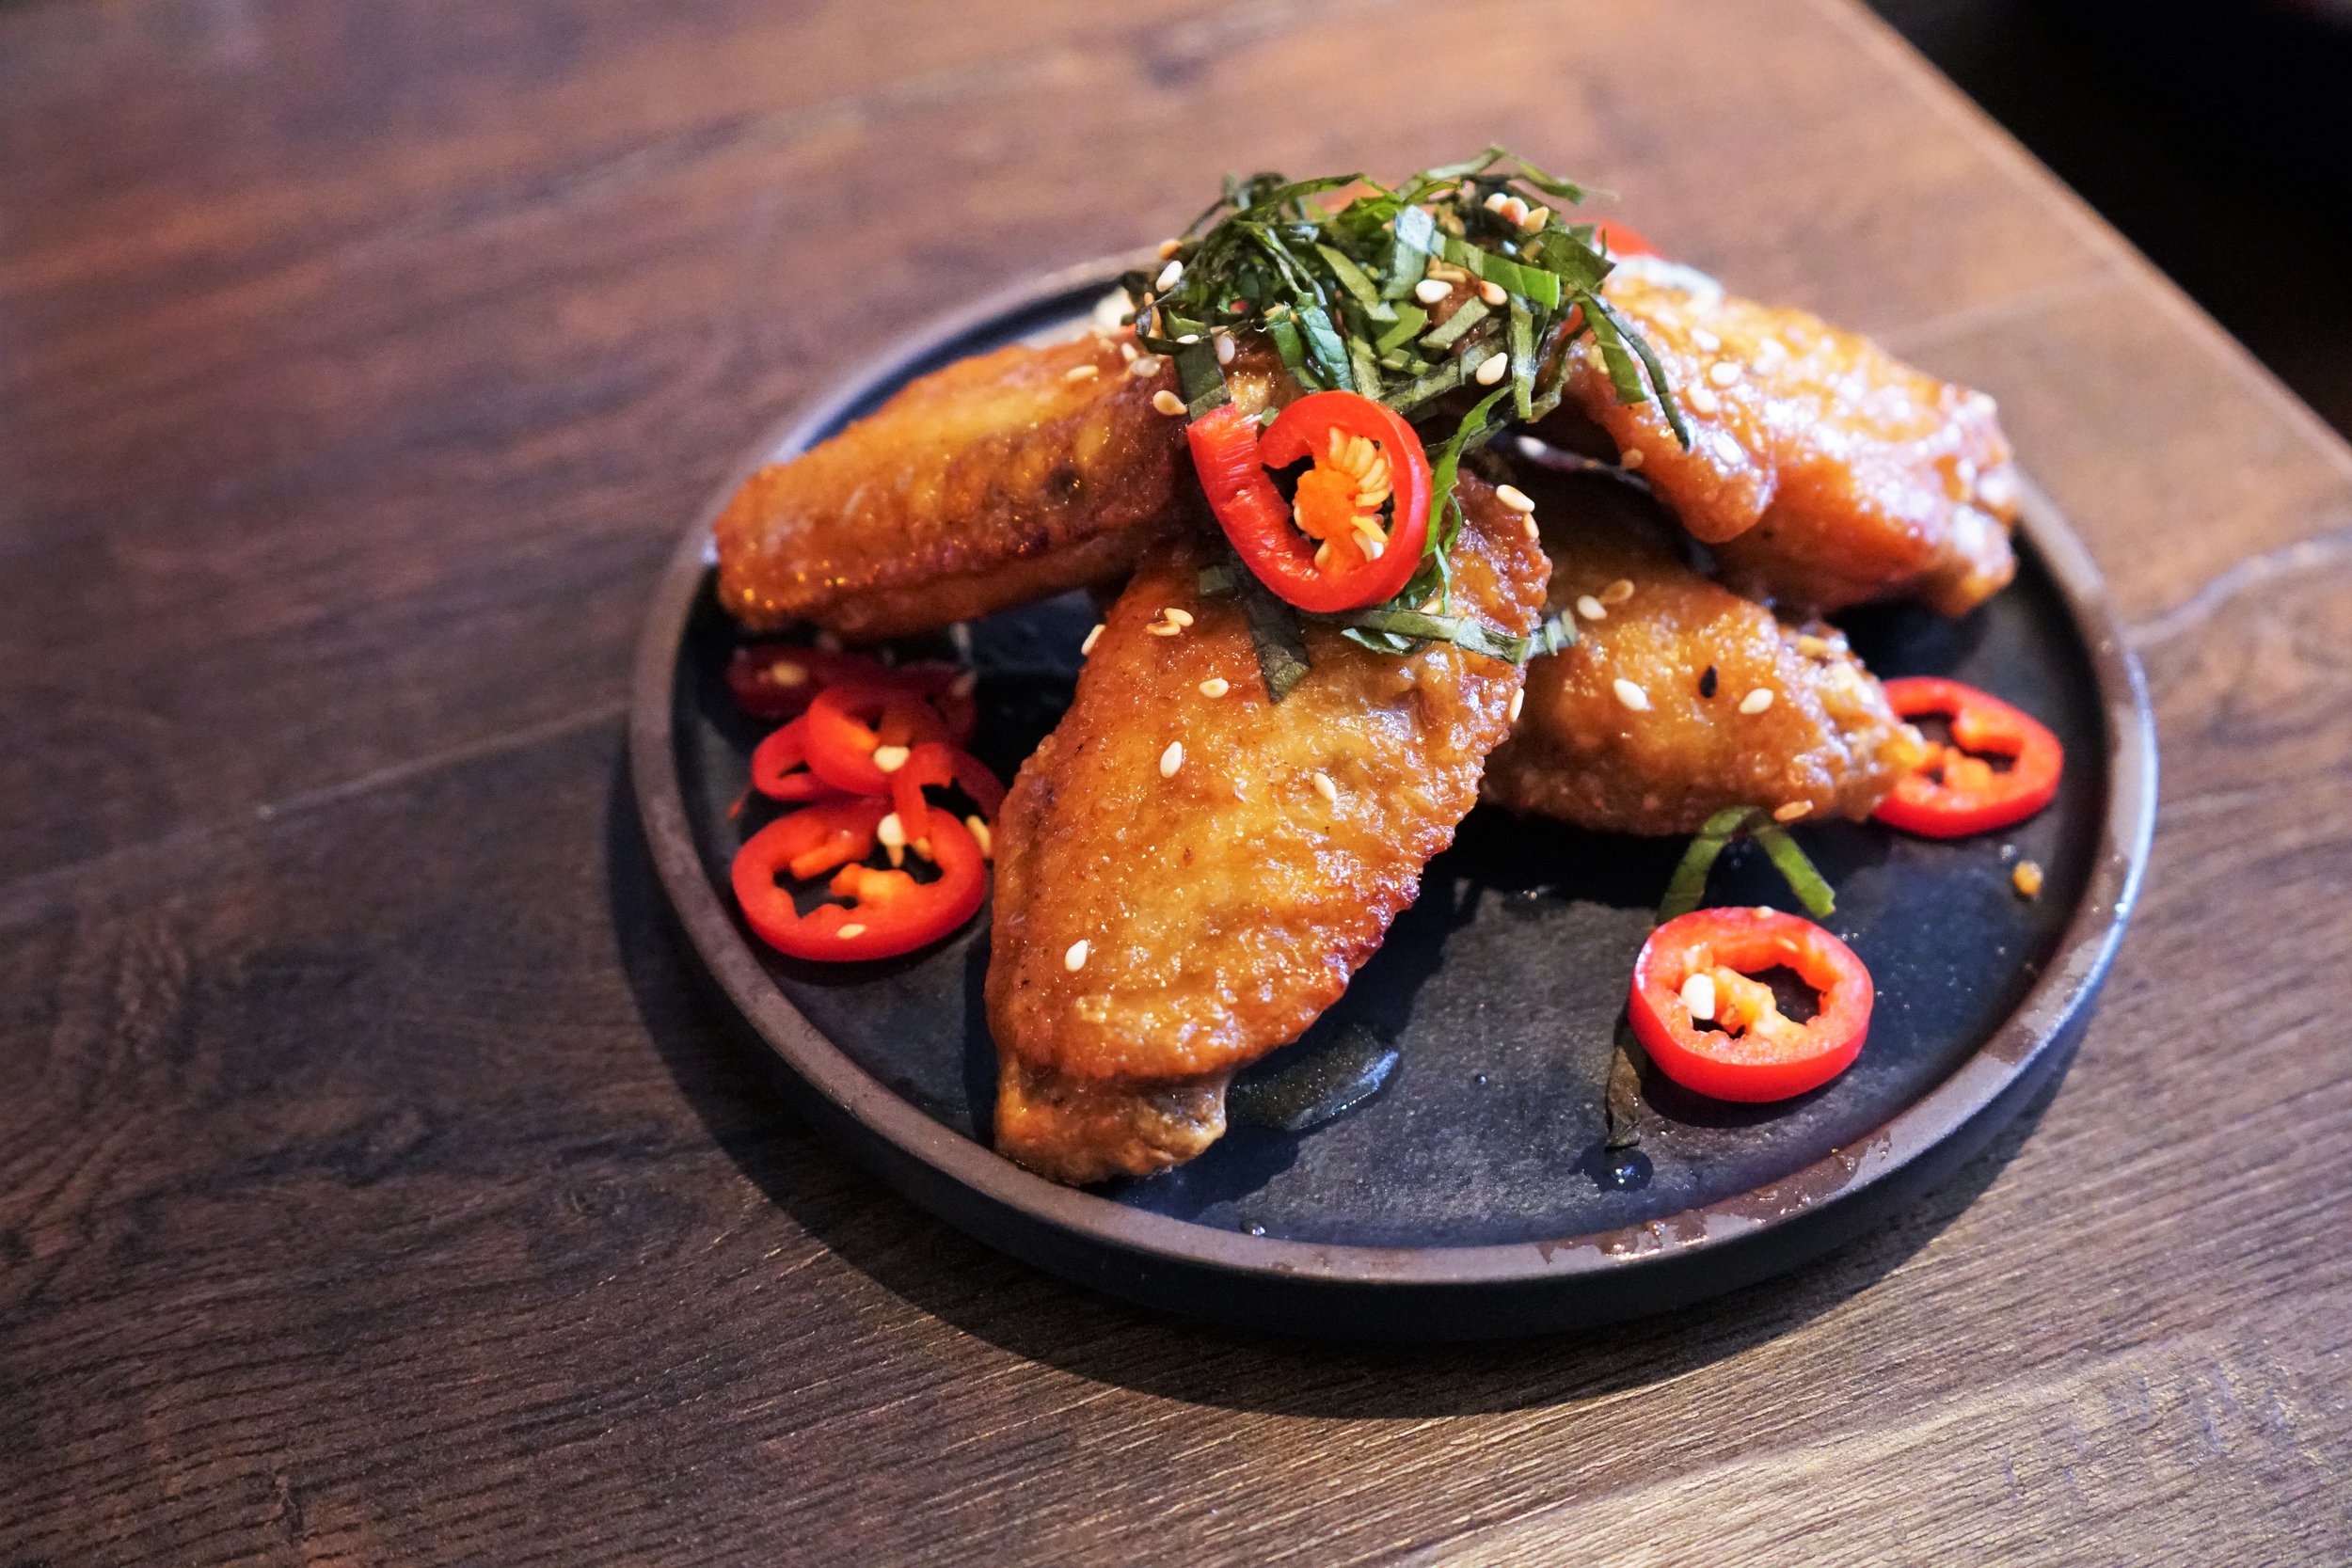 Three-Cup Glazed Chicken Wing at 886 in New York City